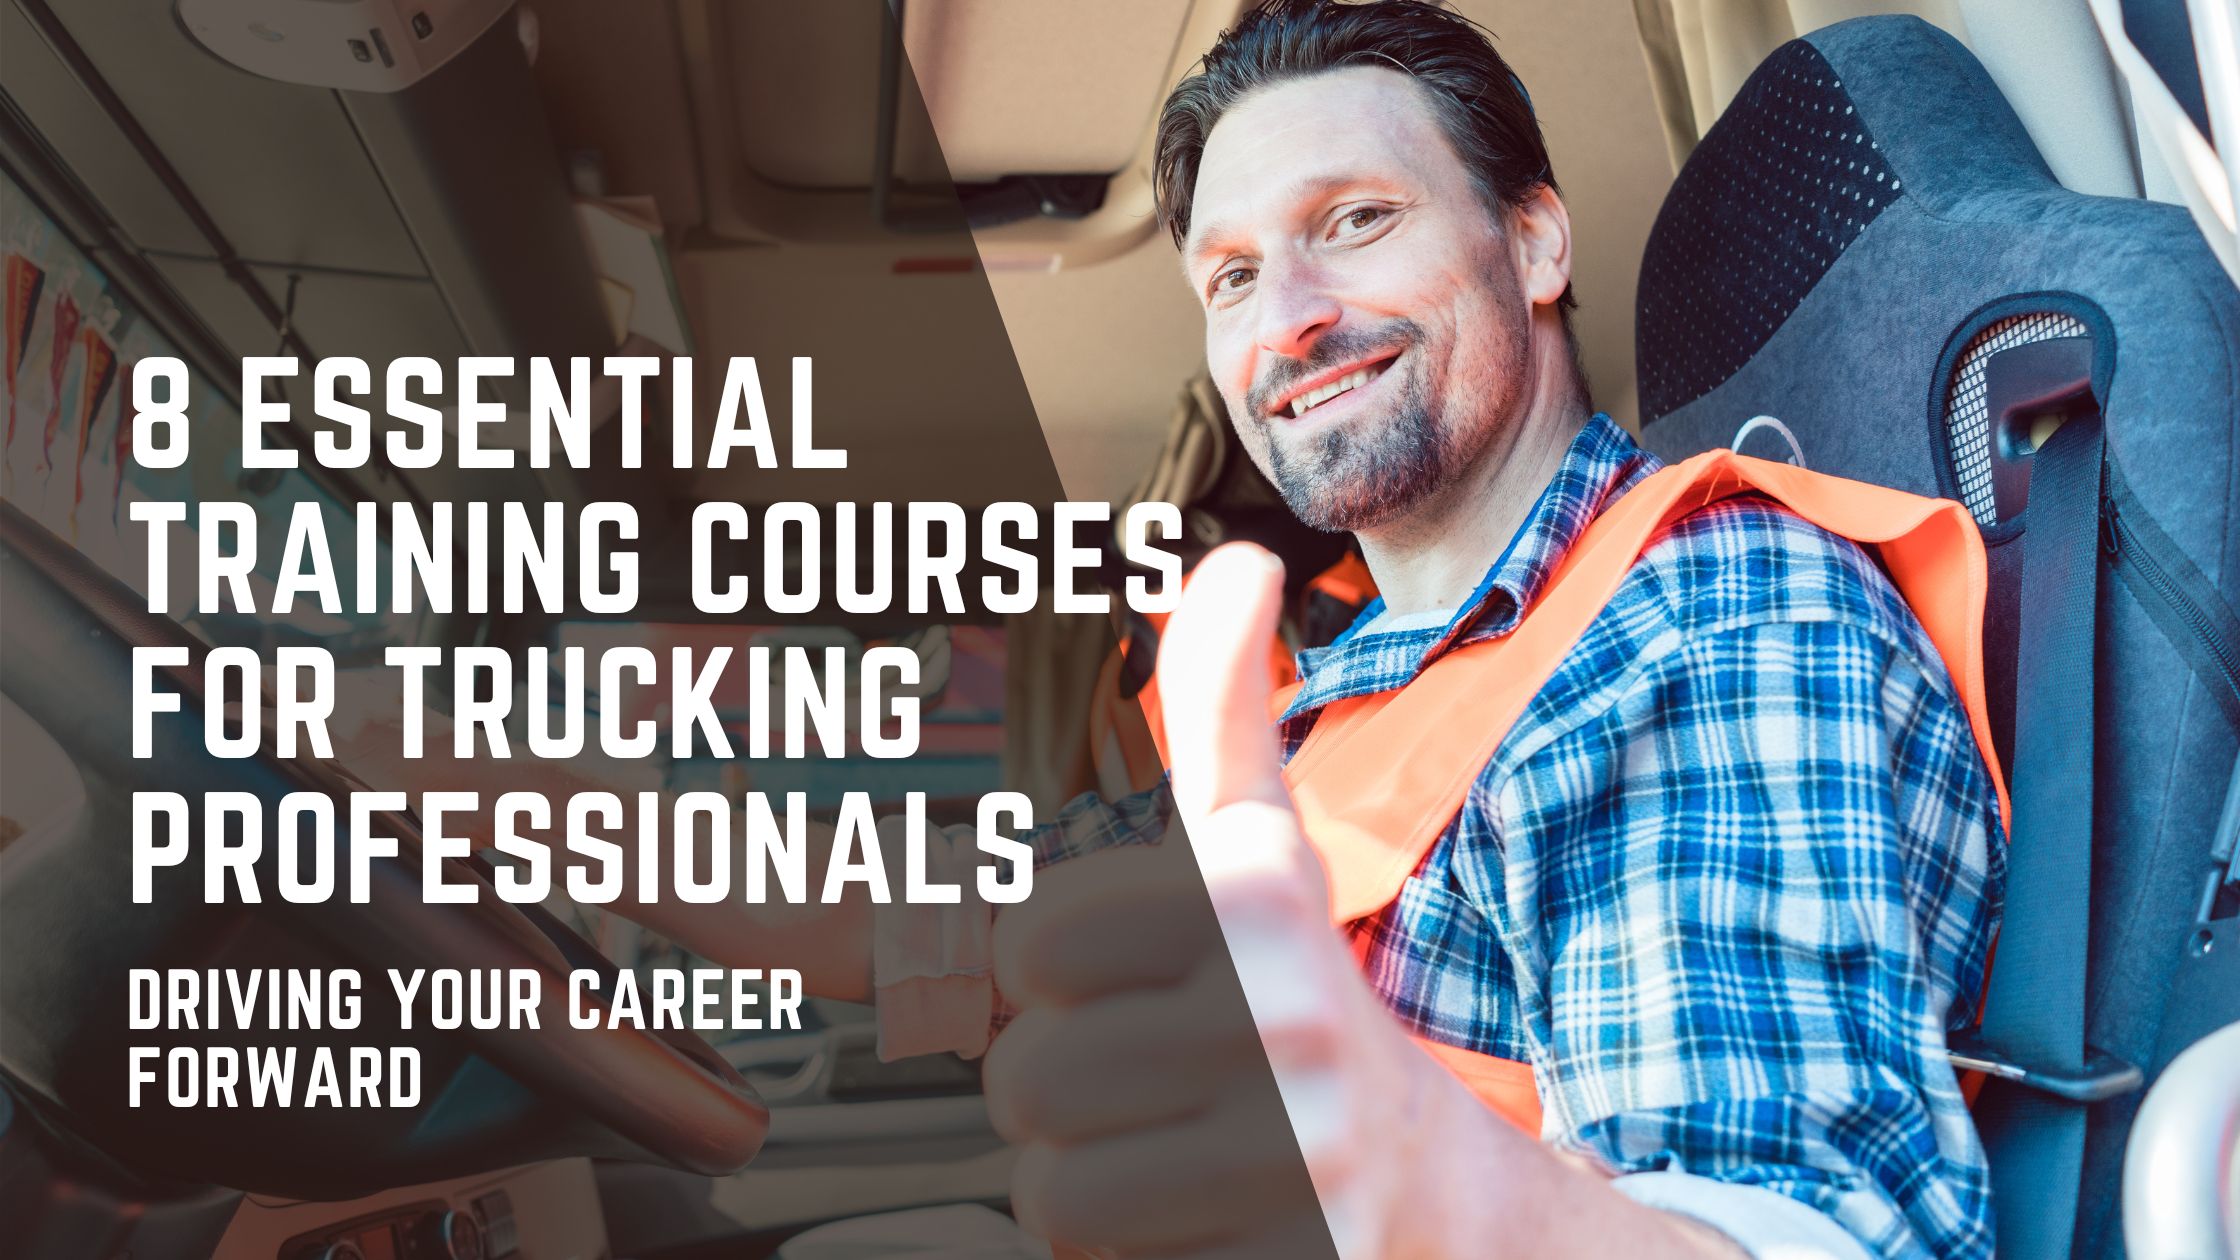 8 Essential Training Courses For Trucking Professionals: Driving Your Career Forward